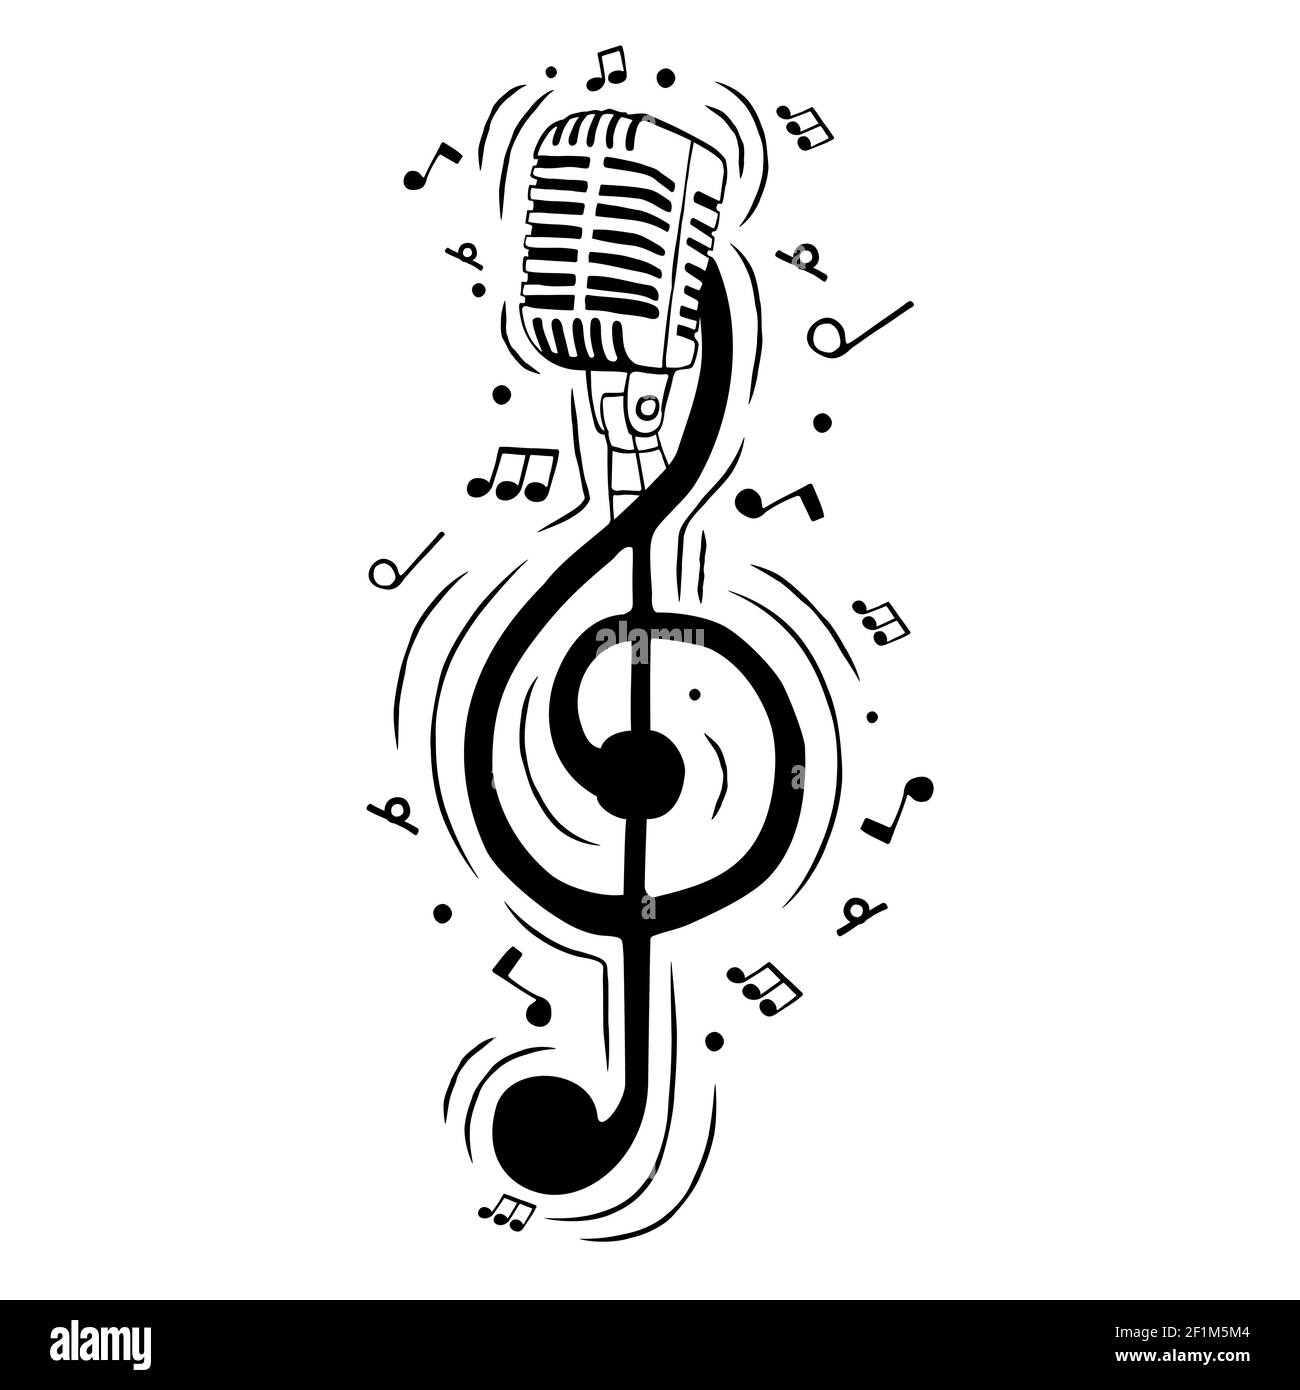 Music treble clef note as microphone illustration for musical event or singing concept. Hand drawn cartoon on isolated background. Stock Vector